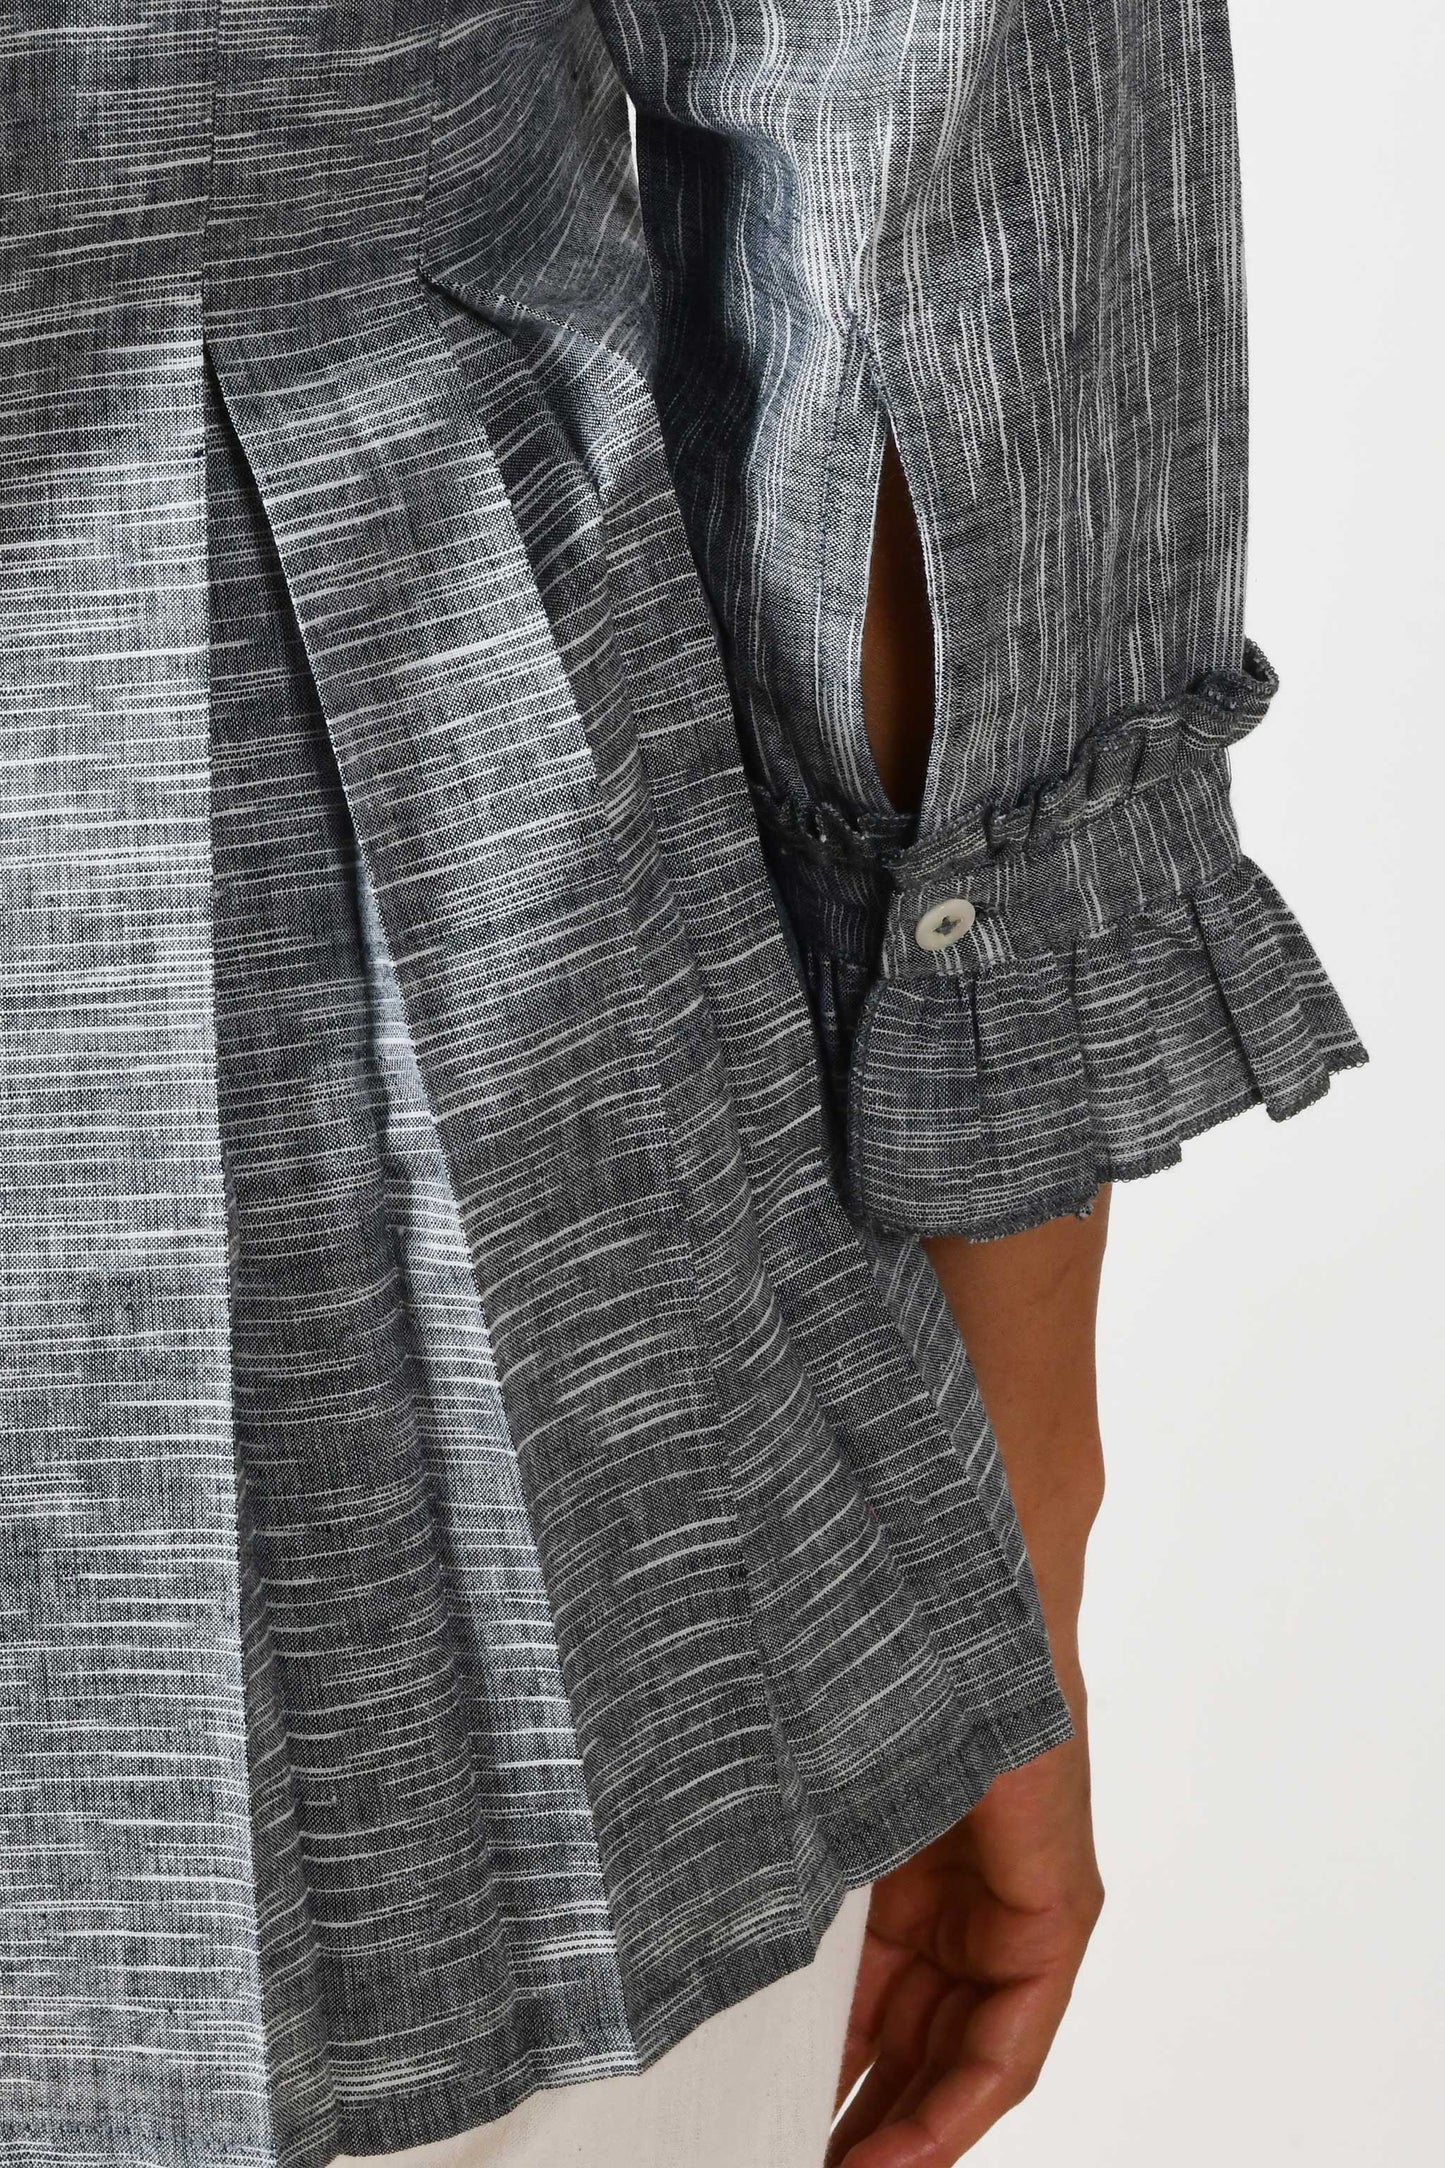 close up of the ruffled sleeve and cuff placket of a grey cotton top.